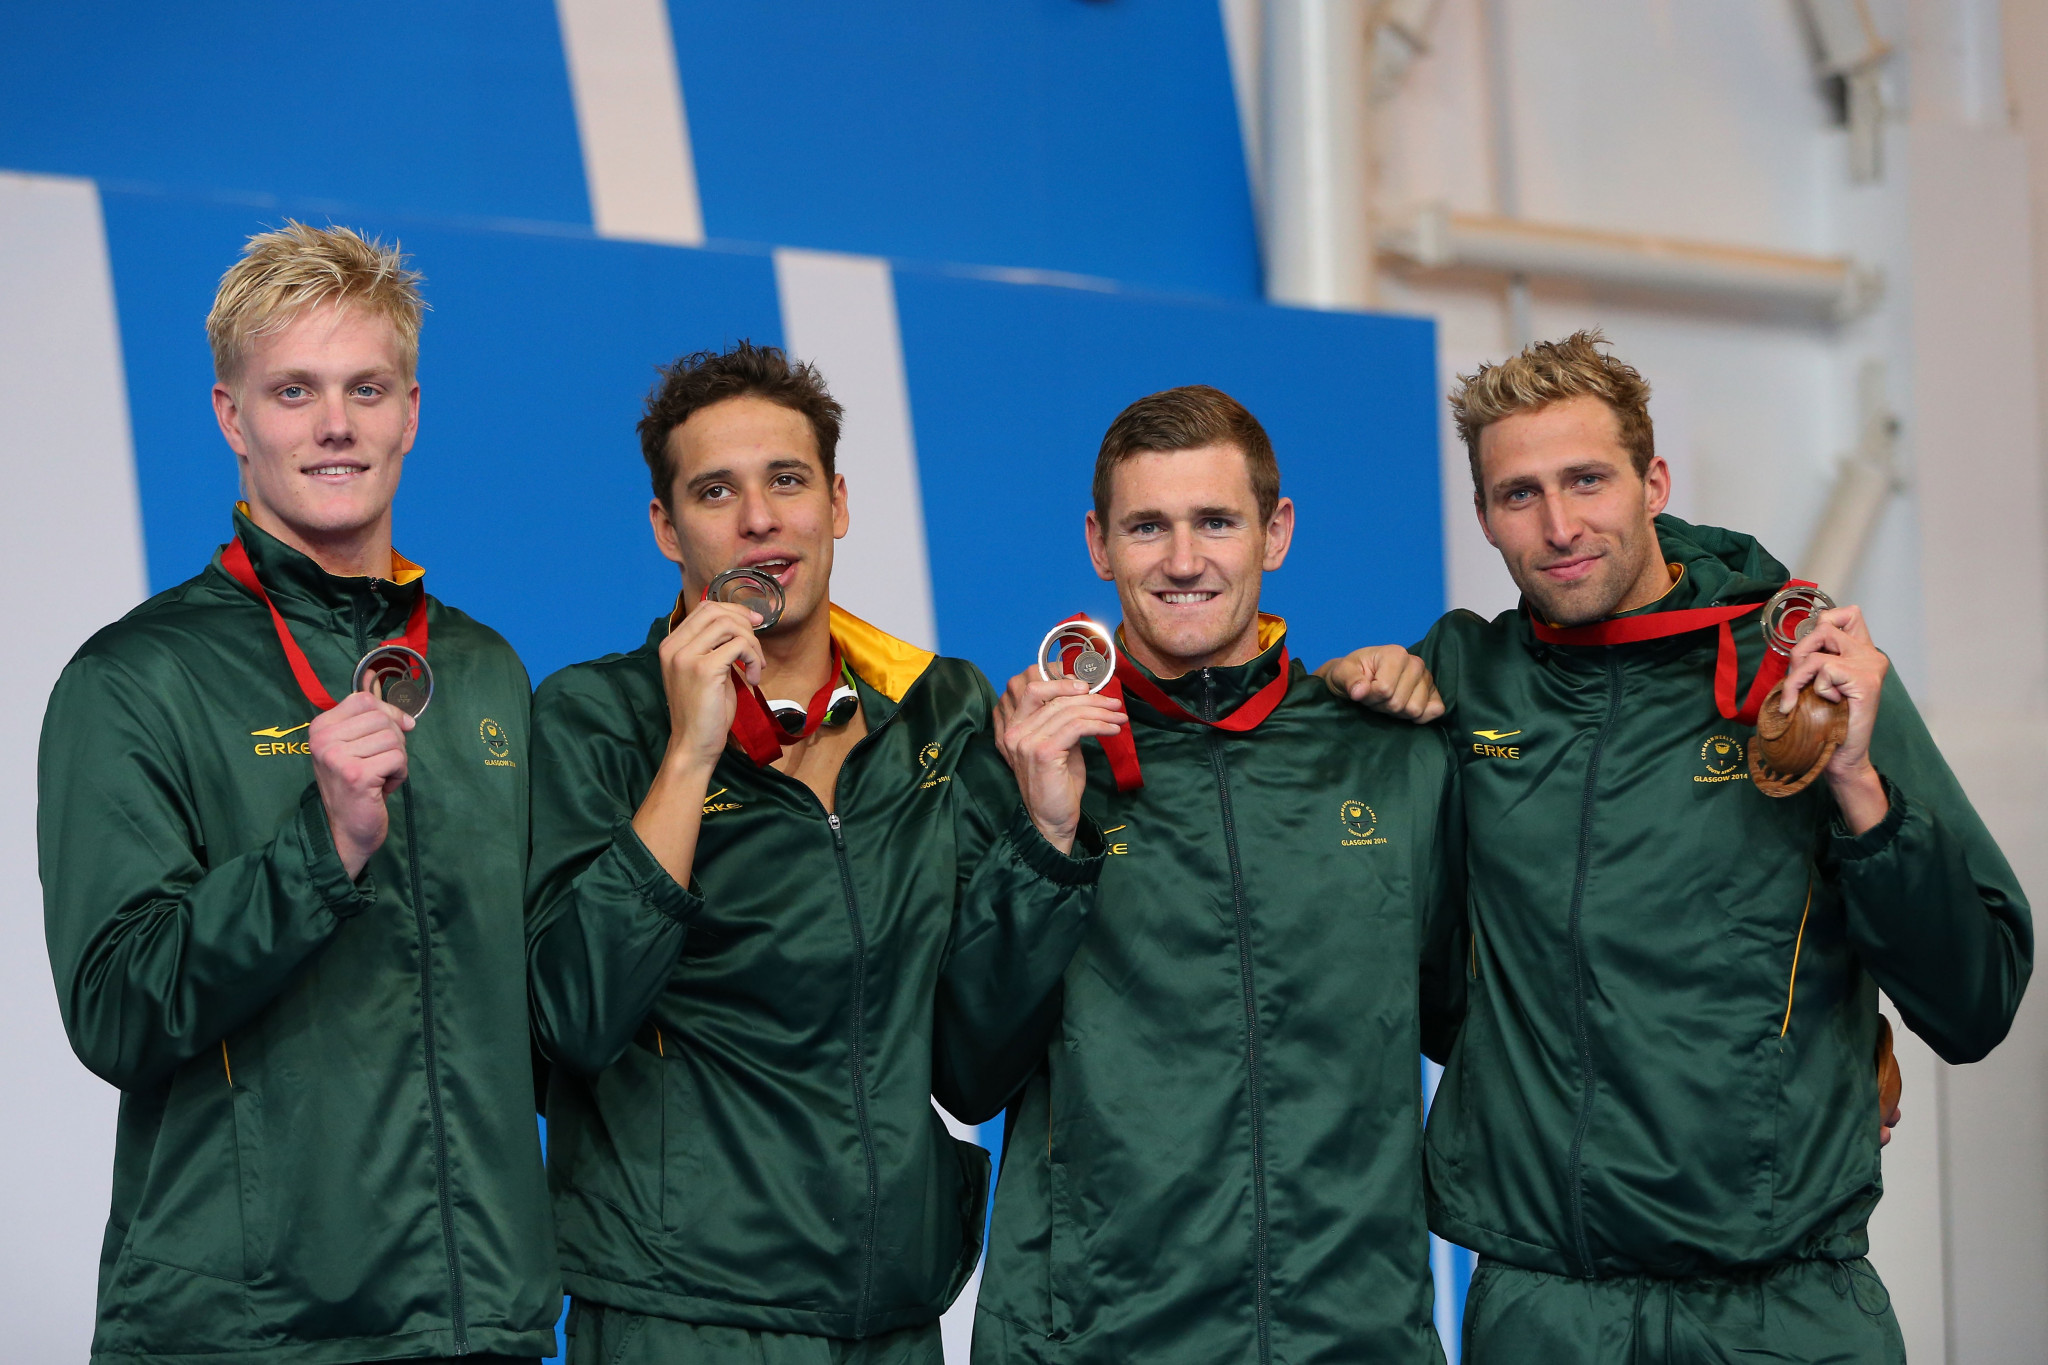 Relays have contributed to six of Chad le Clos' Commonwealth Games medals and would be crucial to his attempts to break the medals record ©Getty Images